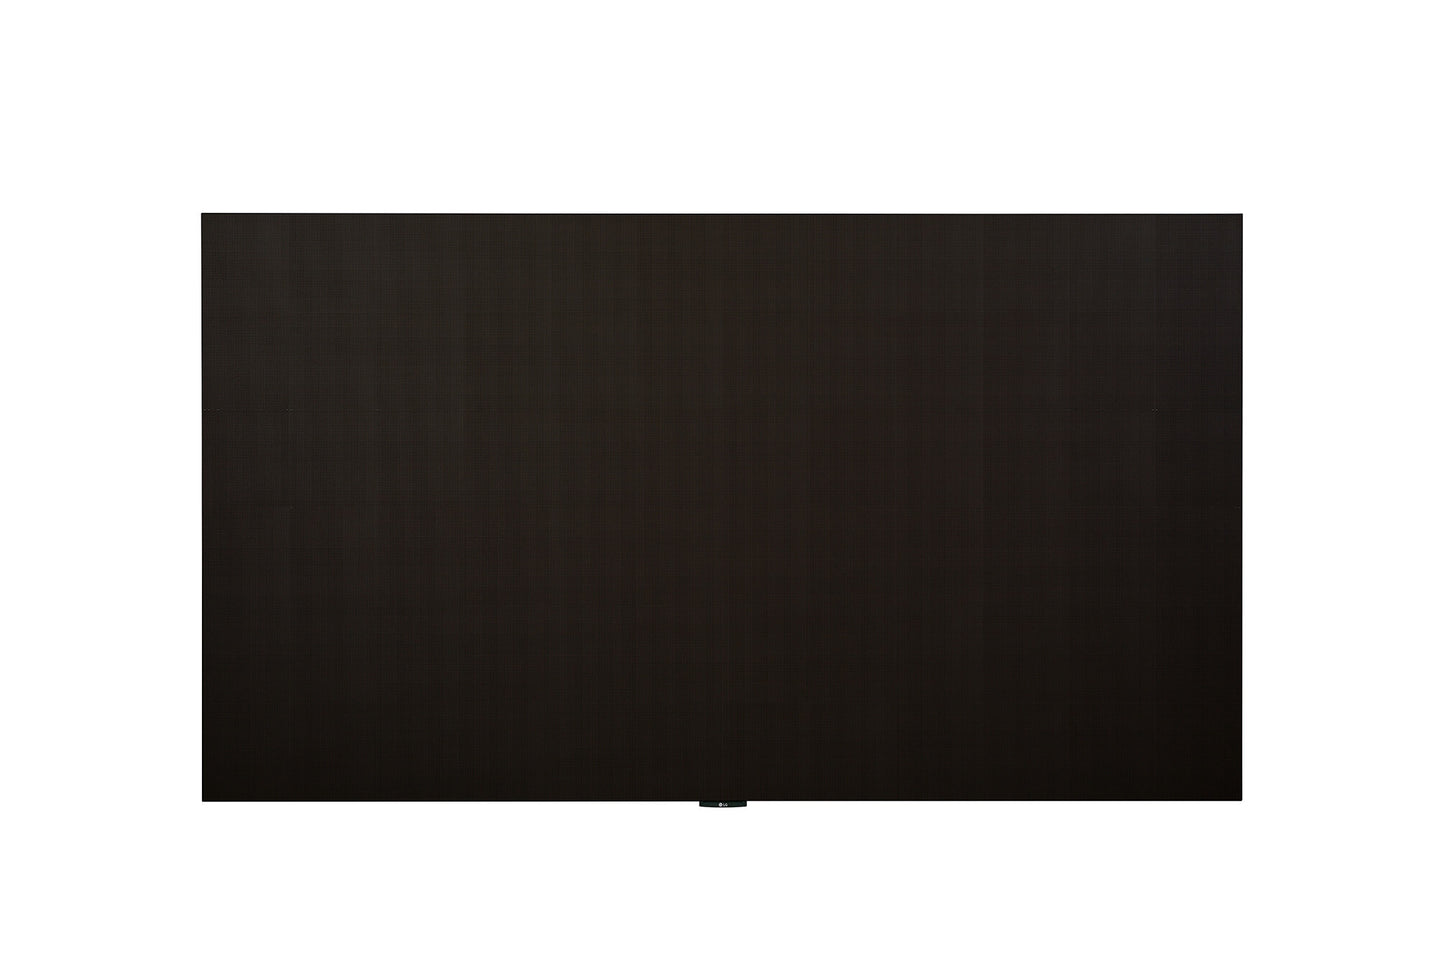 LG LAEC015-GN2 136" All-In-One display